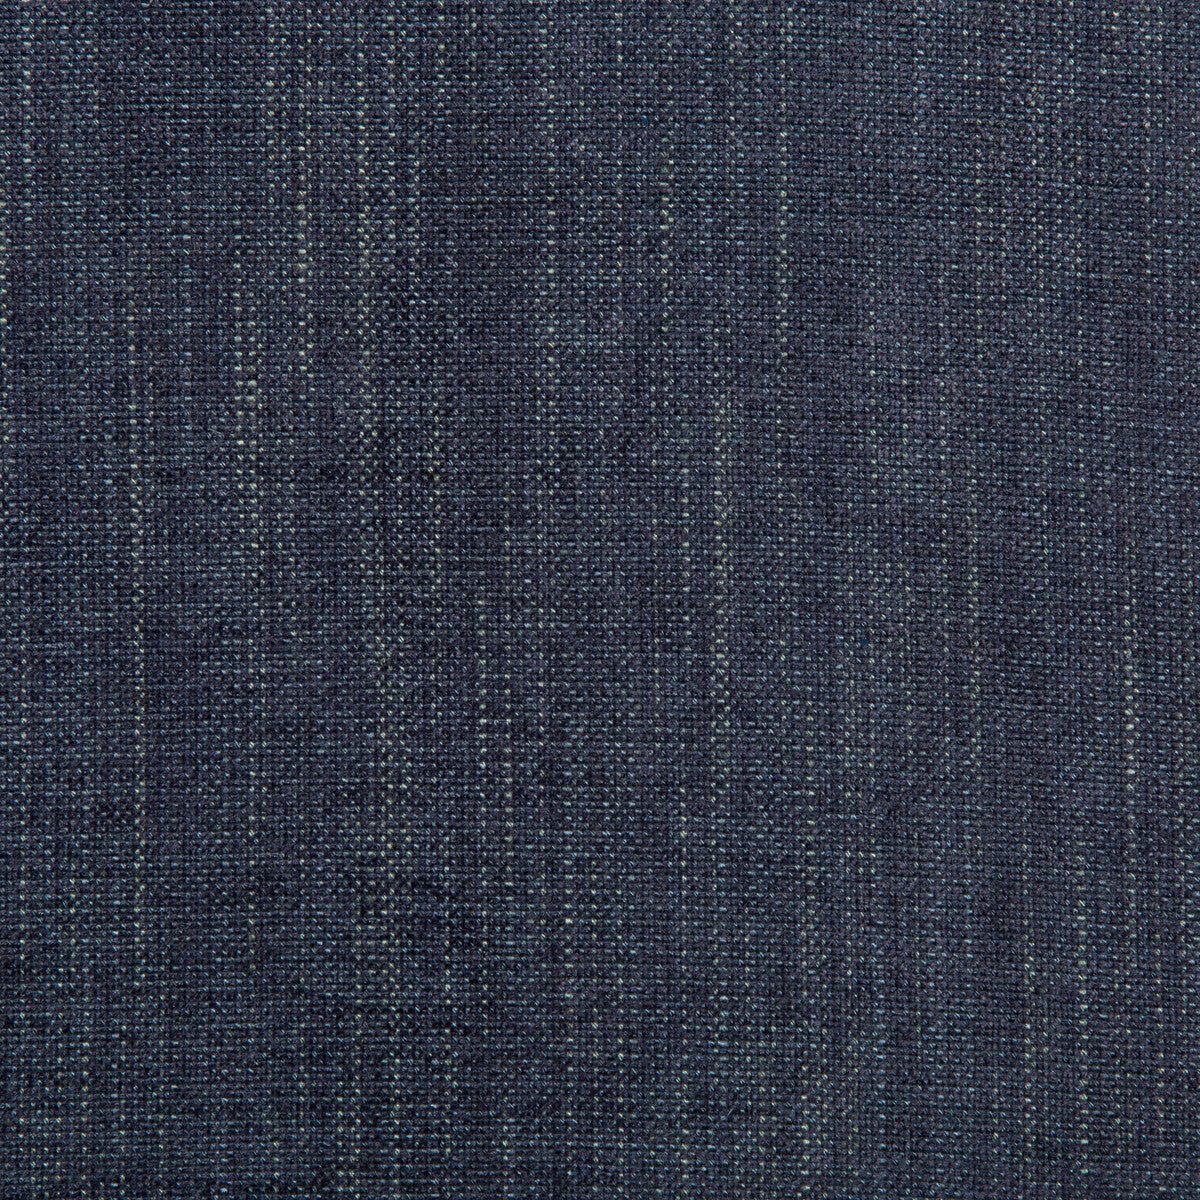 Carbon Texture fabric in azure color - pattern 35507.50.0 - by Kravet Design in the Barclay Butera Sagamore collection